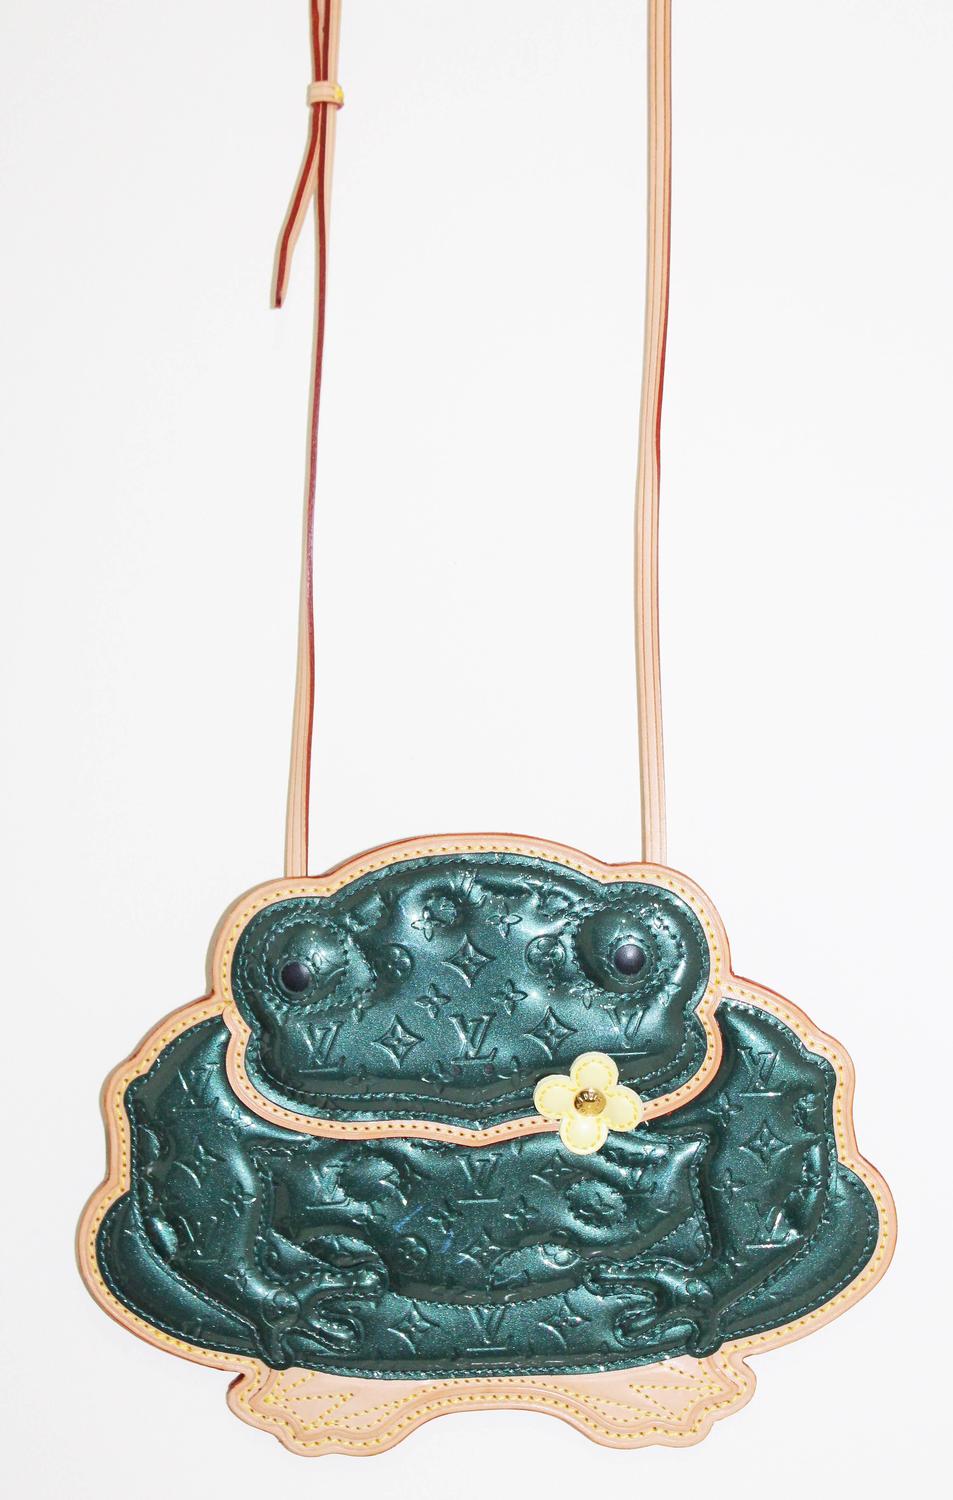 Louis Vuitton Limited Edition Conte De Fees Frog Crossbody Bag c. 2002 at 1stdibs